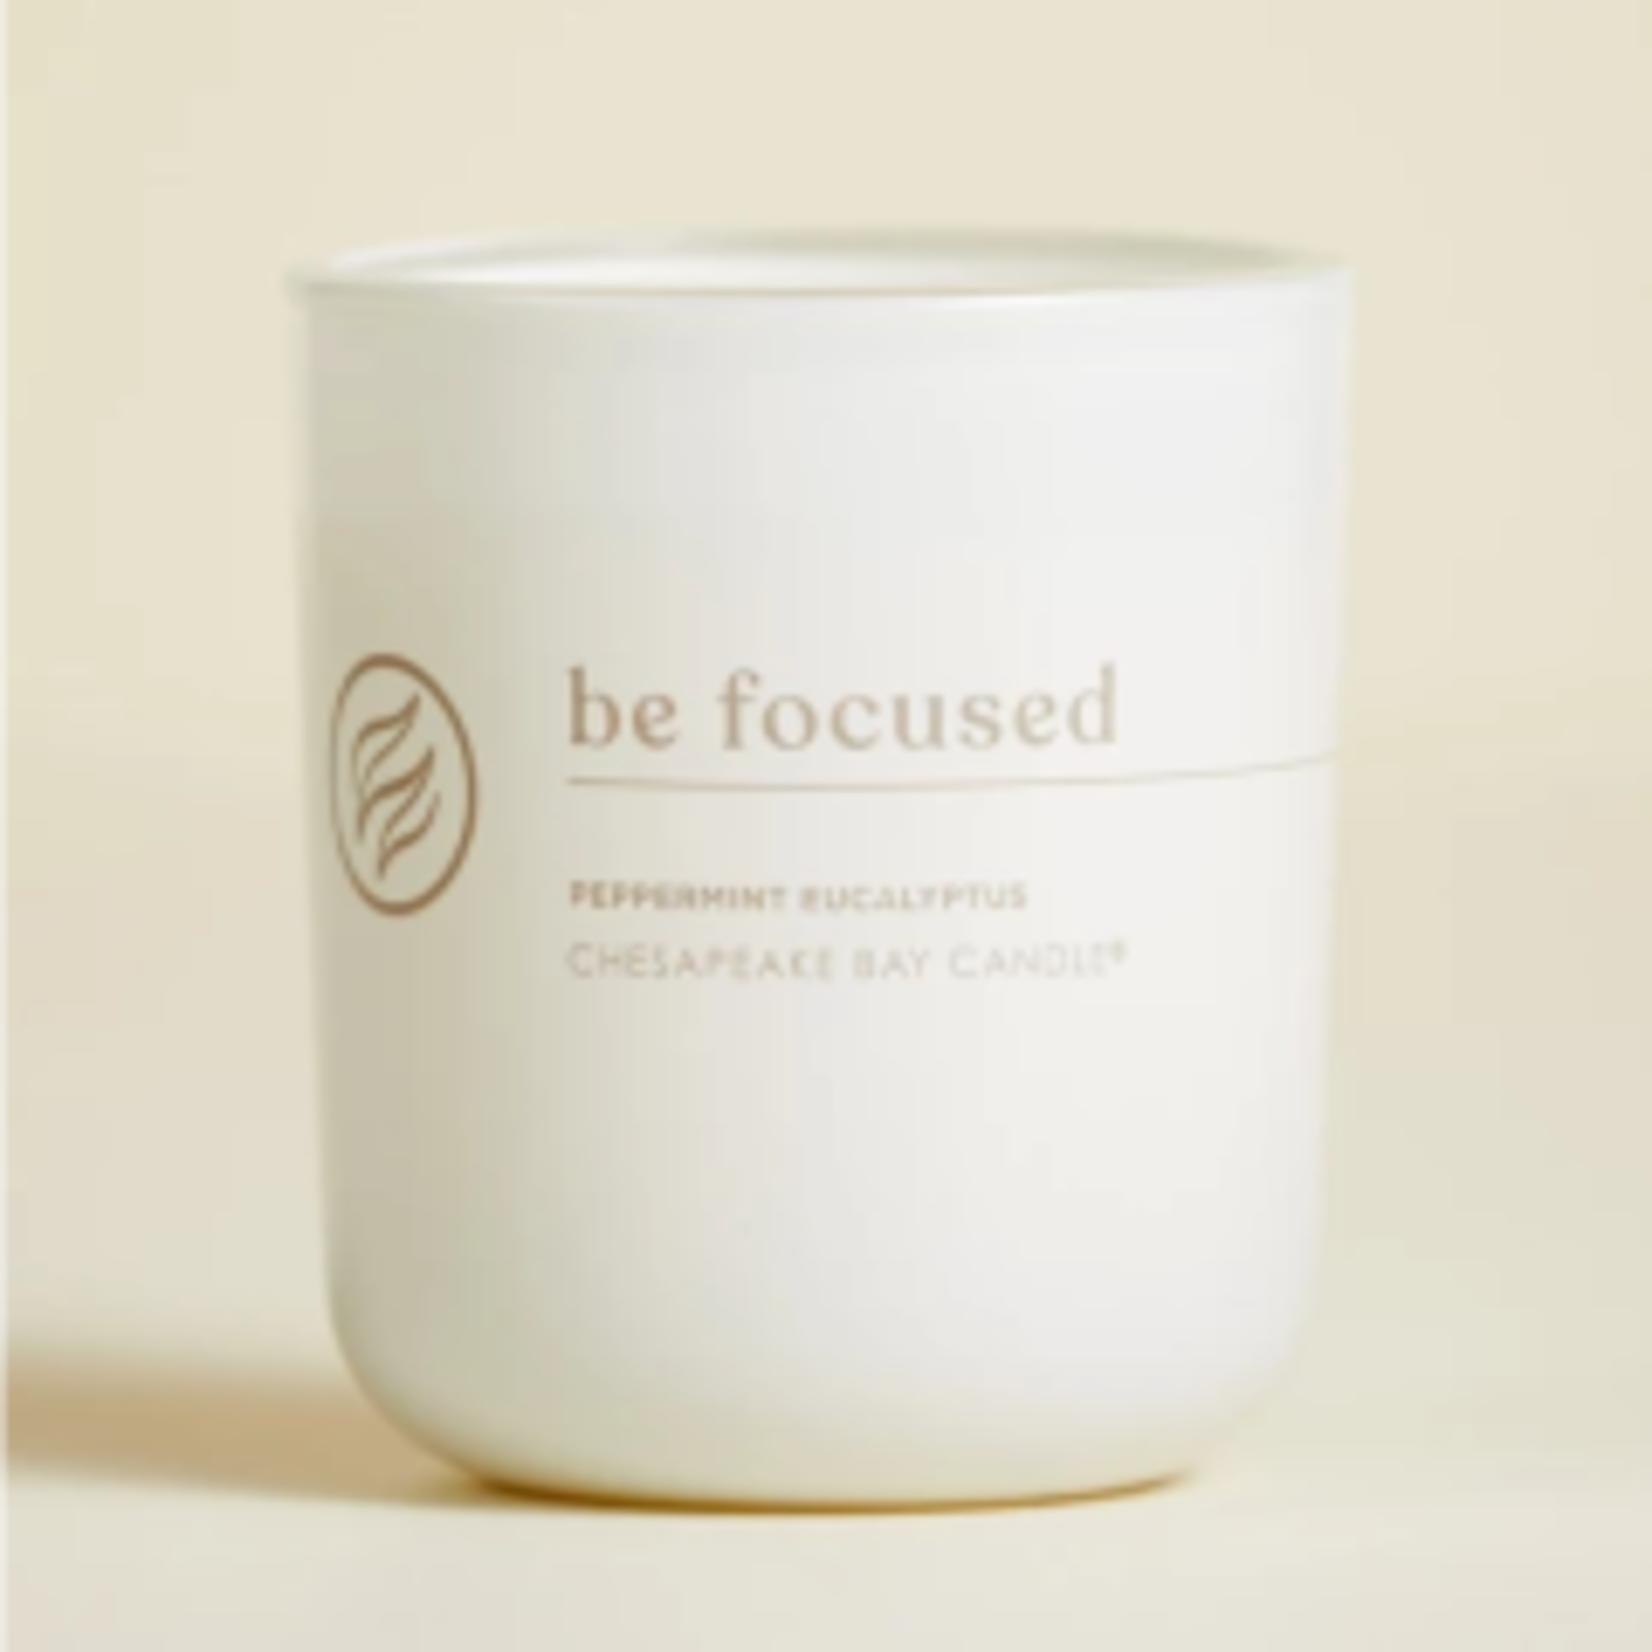 Chesapeake Bay Candle Chesapeake By Candle Be Focused - Peppermint Eucalyptus 13oz